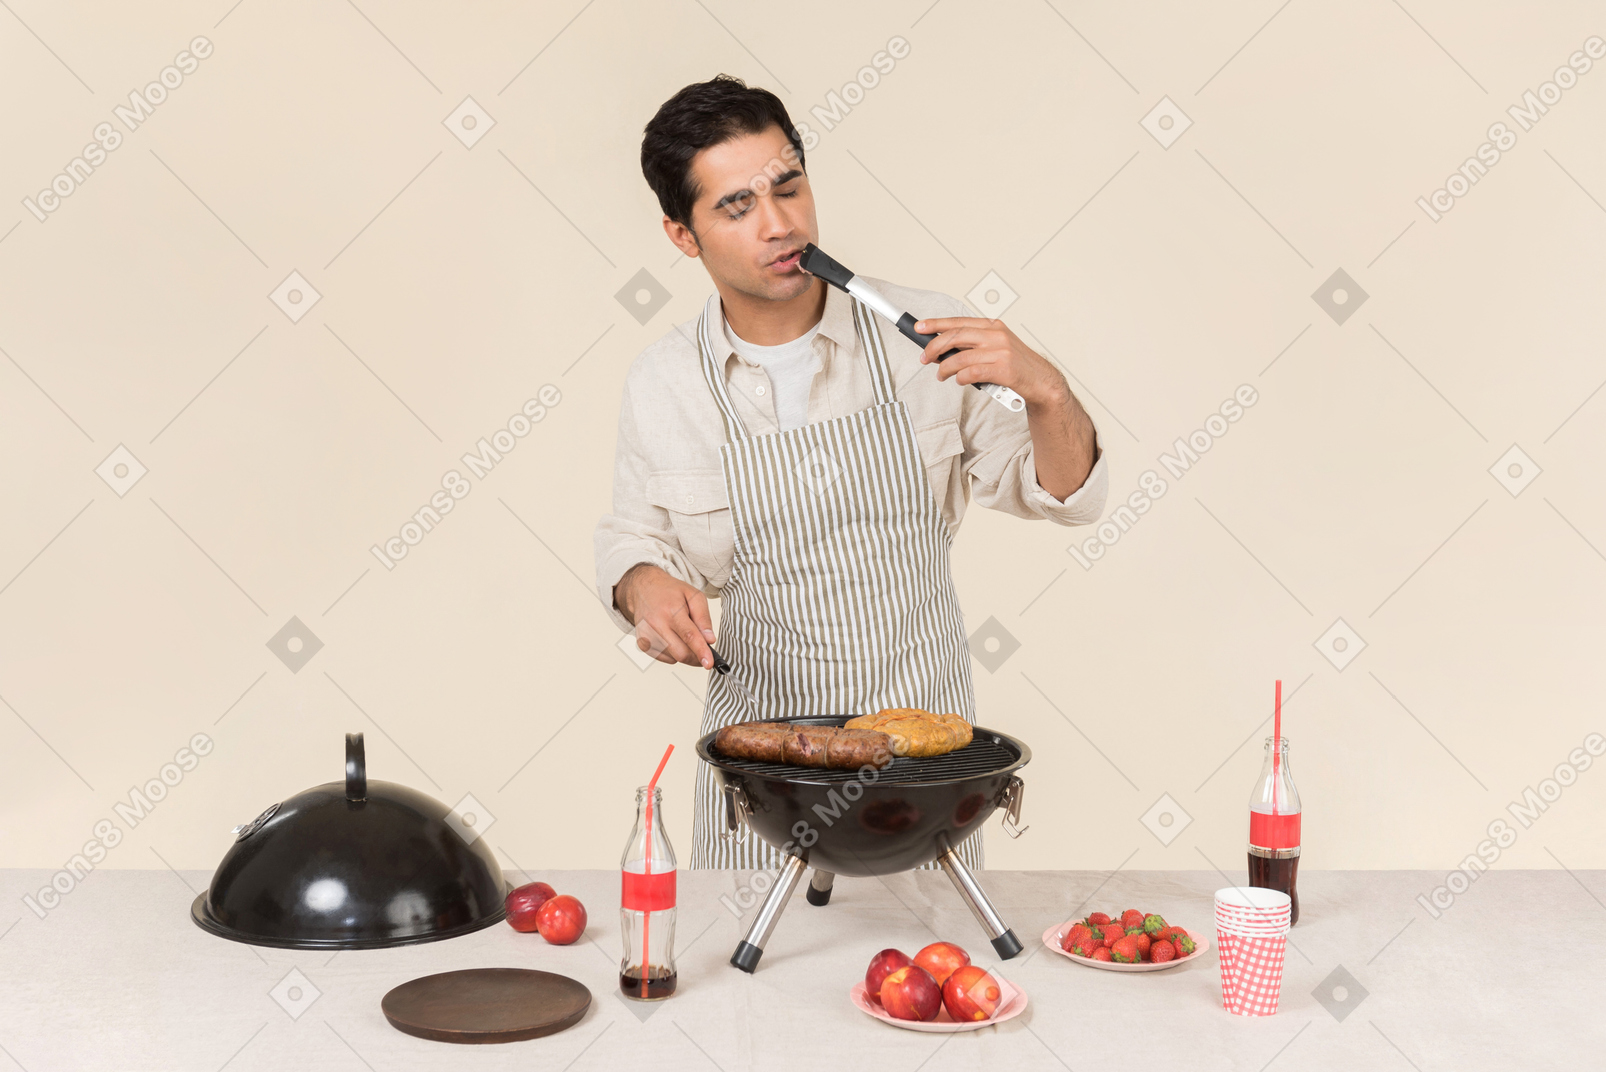 Young caucasian man having a taste of bbq he's cooking